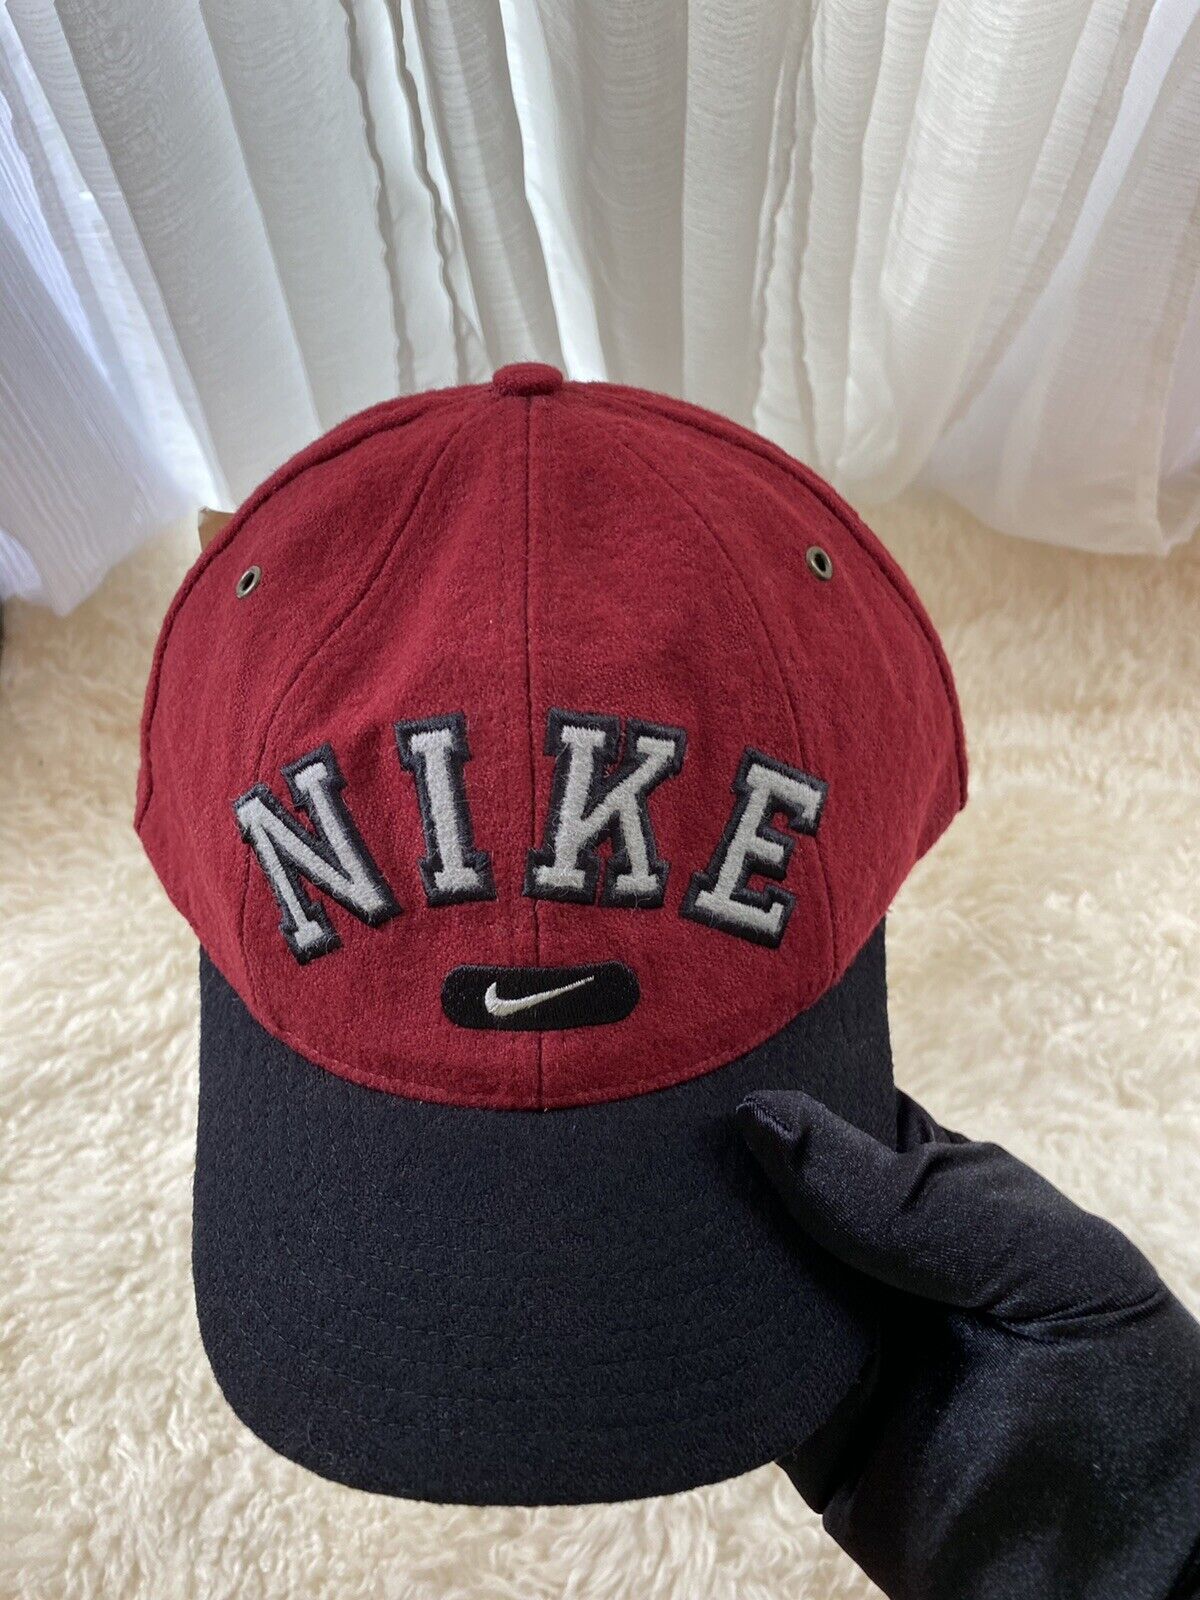 RARE NIKE Wool HAT NEW WITH TAGS - image 2